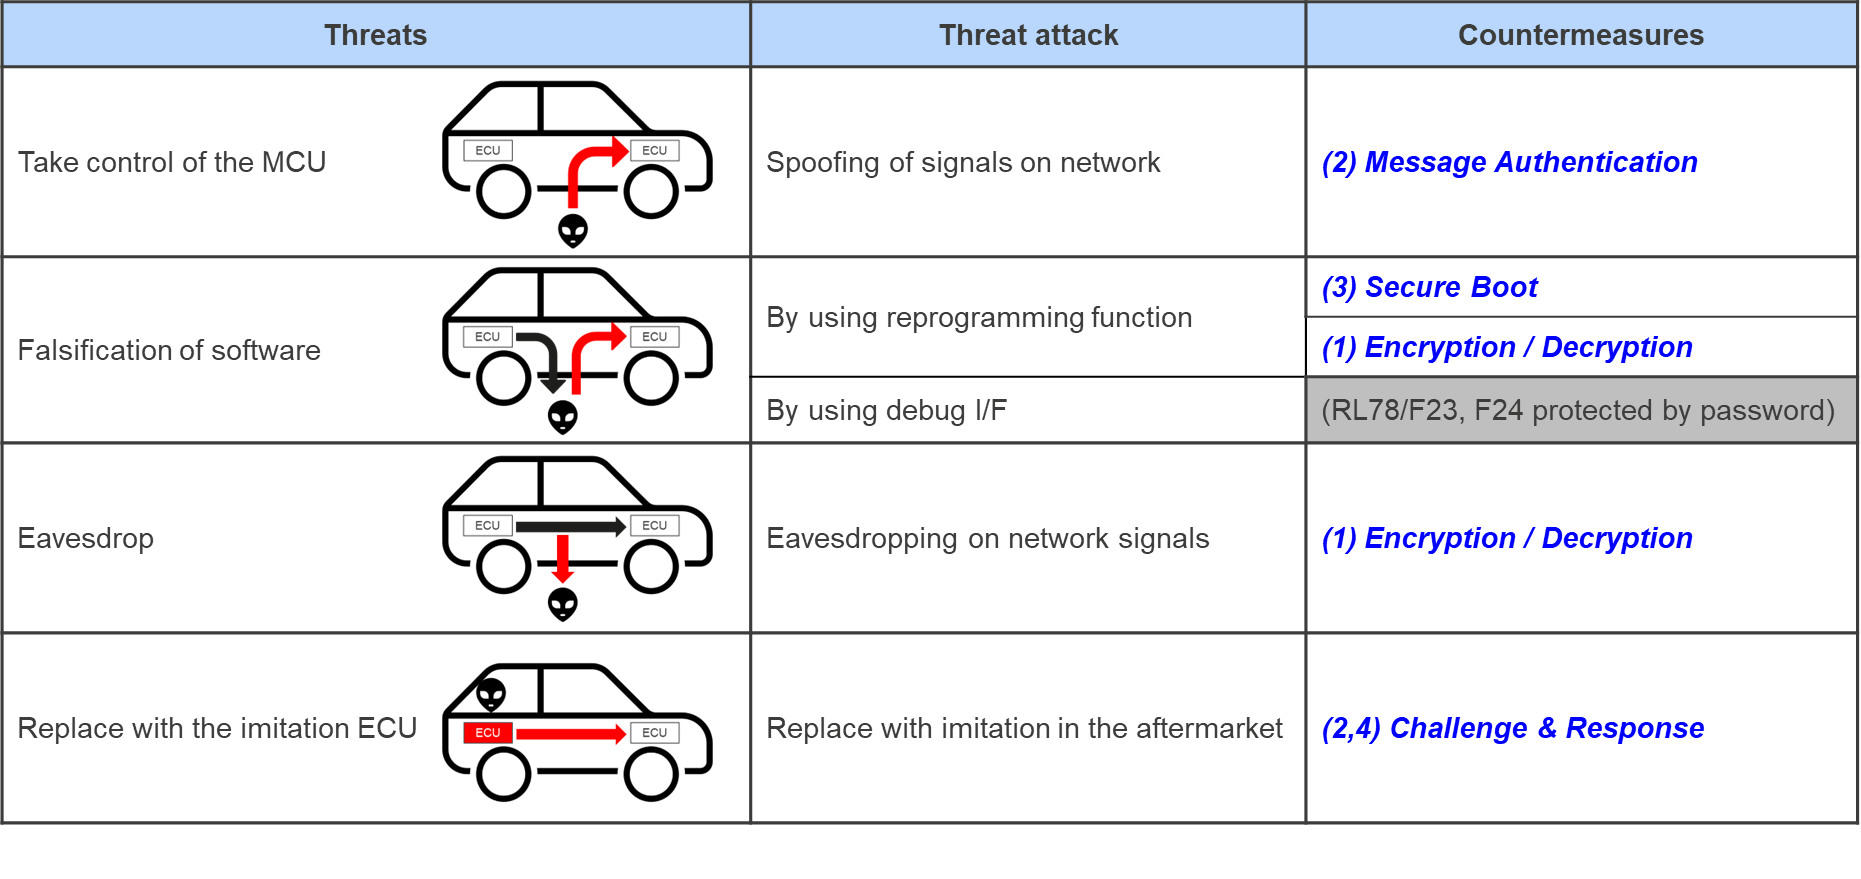 Example of Threats to the actuator domain and countermeasures